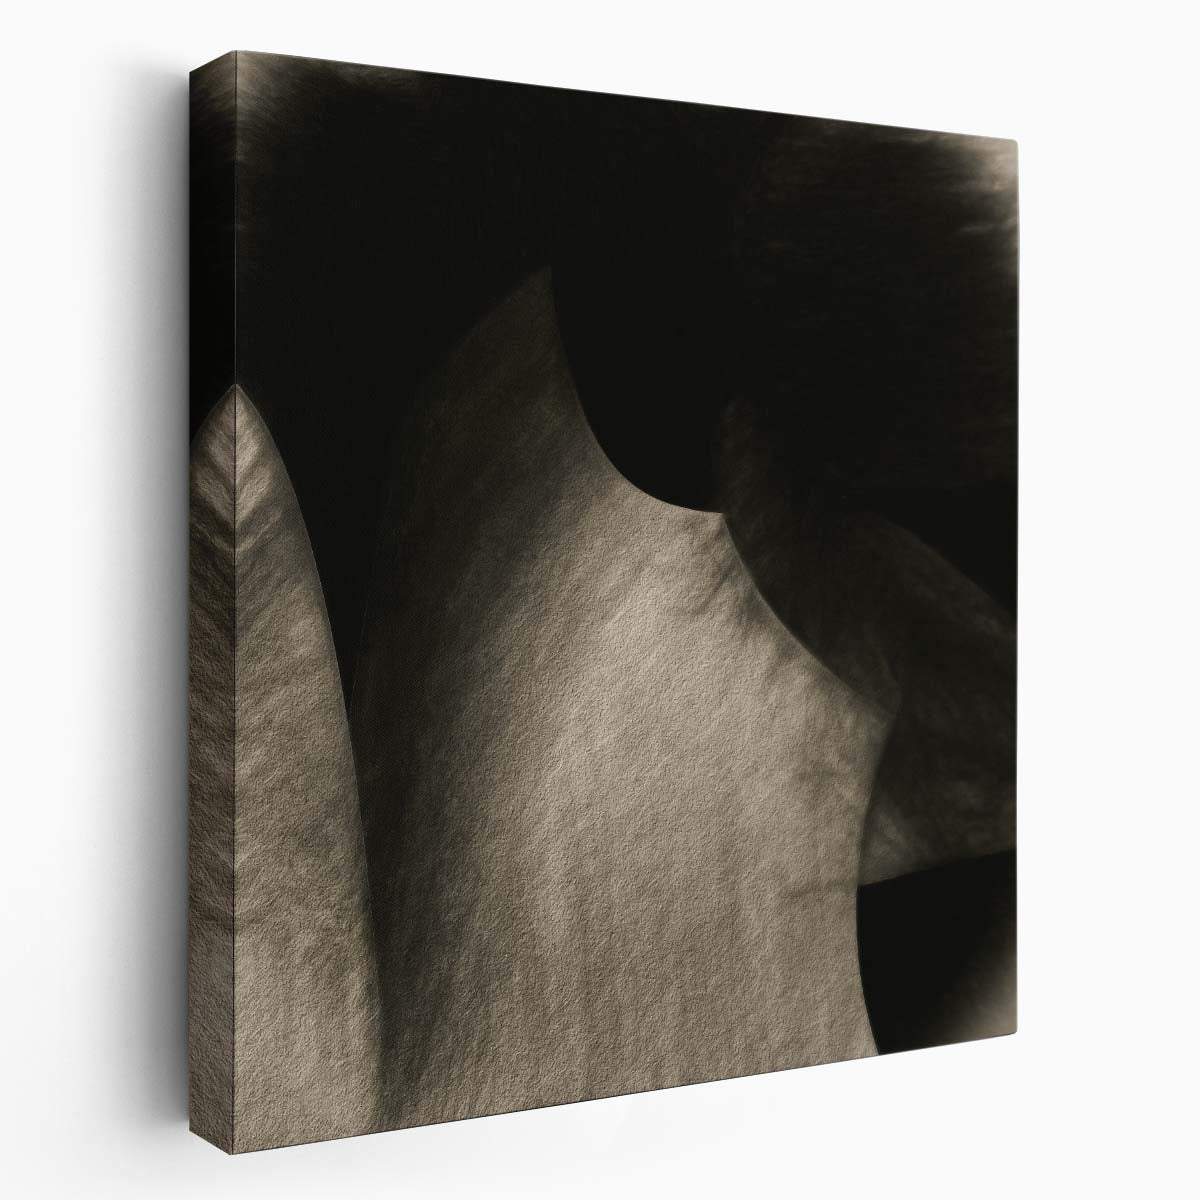 Abstract Black Ink Rock Artistry Photography Wall Art by Luxuriance Designs. Made in USA.